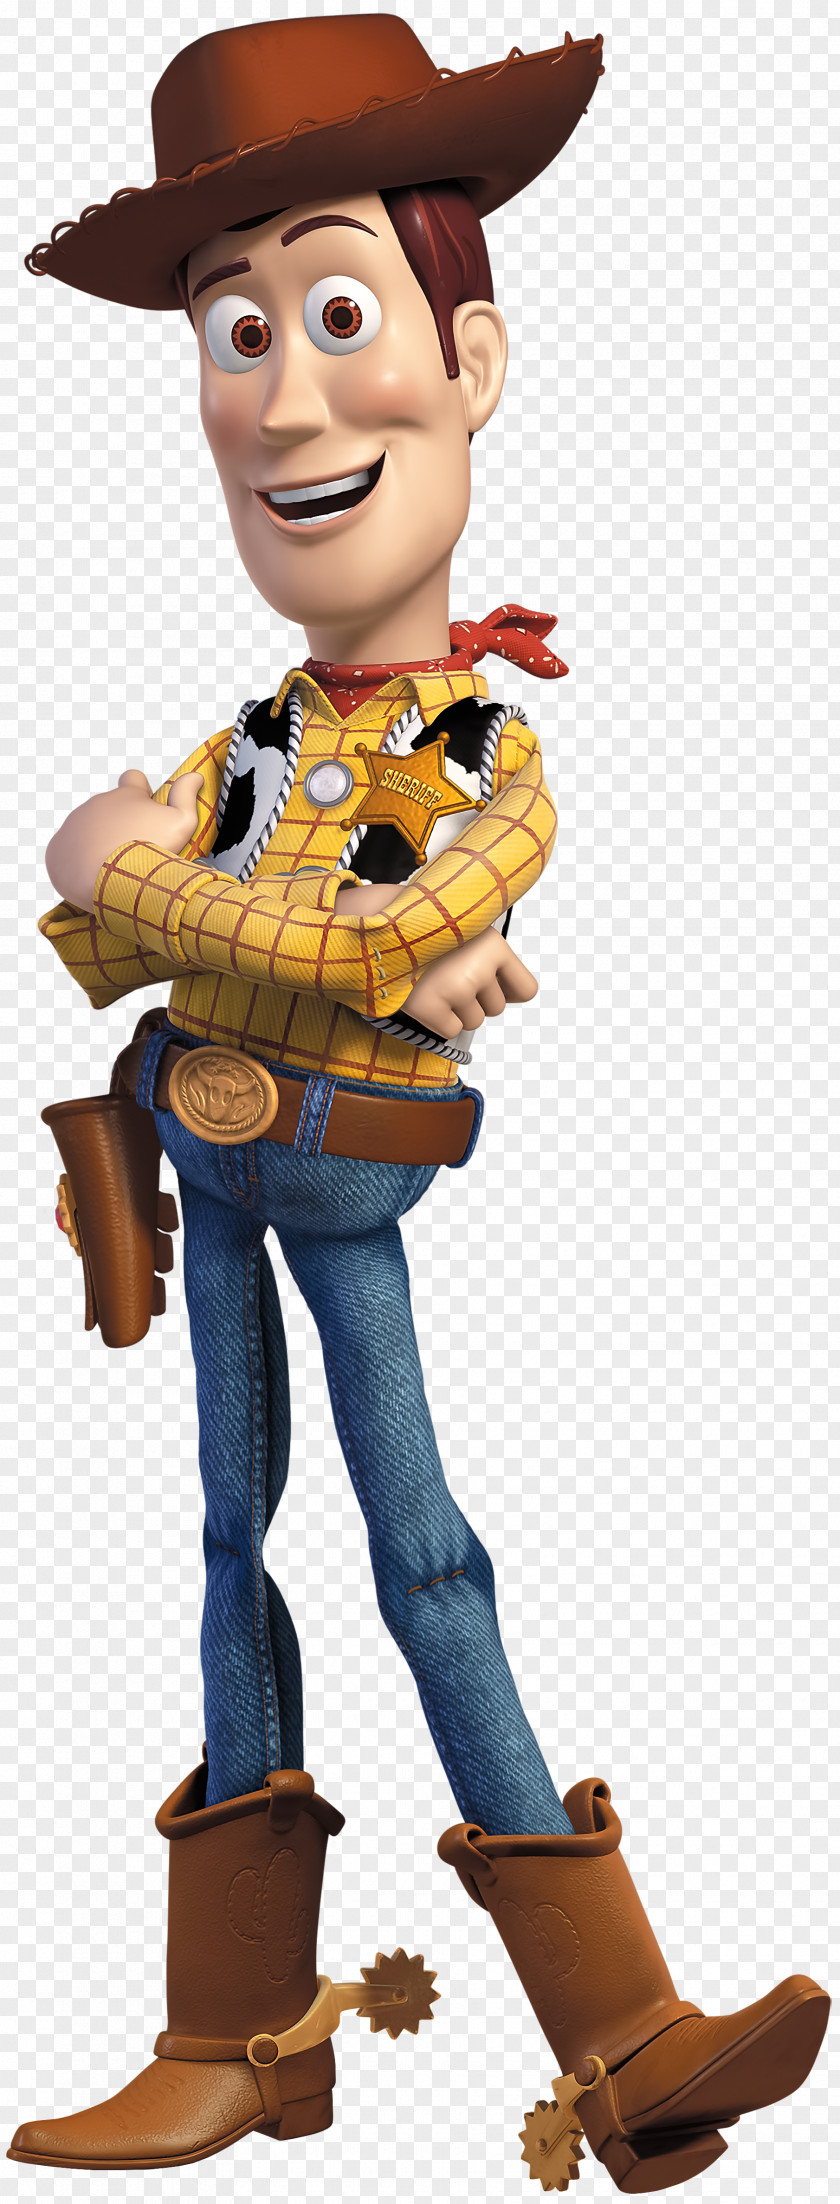 Woody Allen Sheriff Toy Story 3: The Video Game Jessie Buzz Lightyear PNG